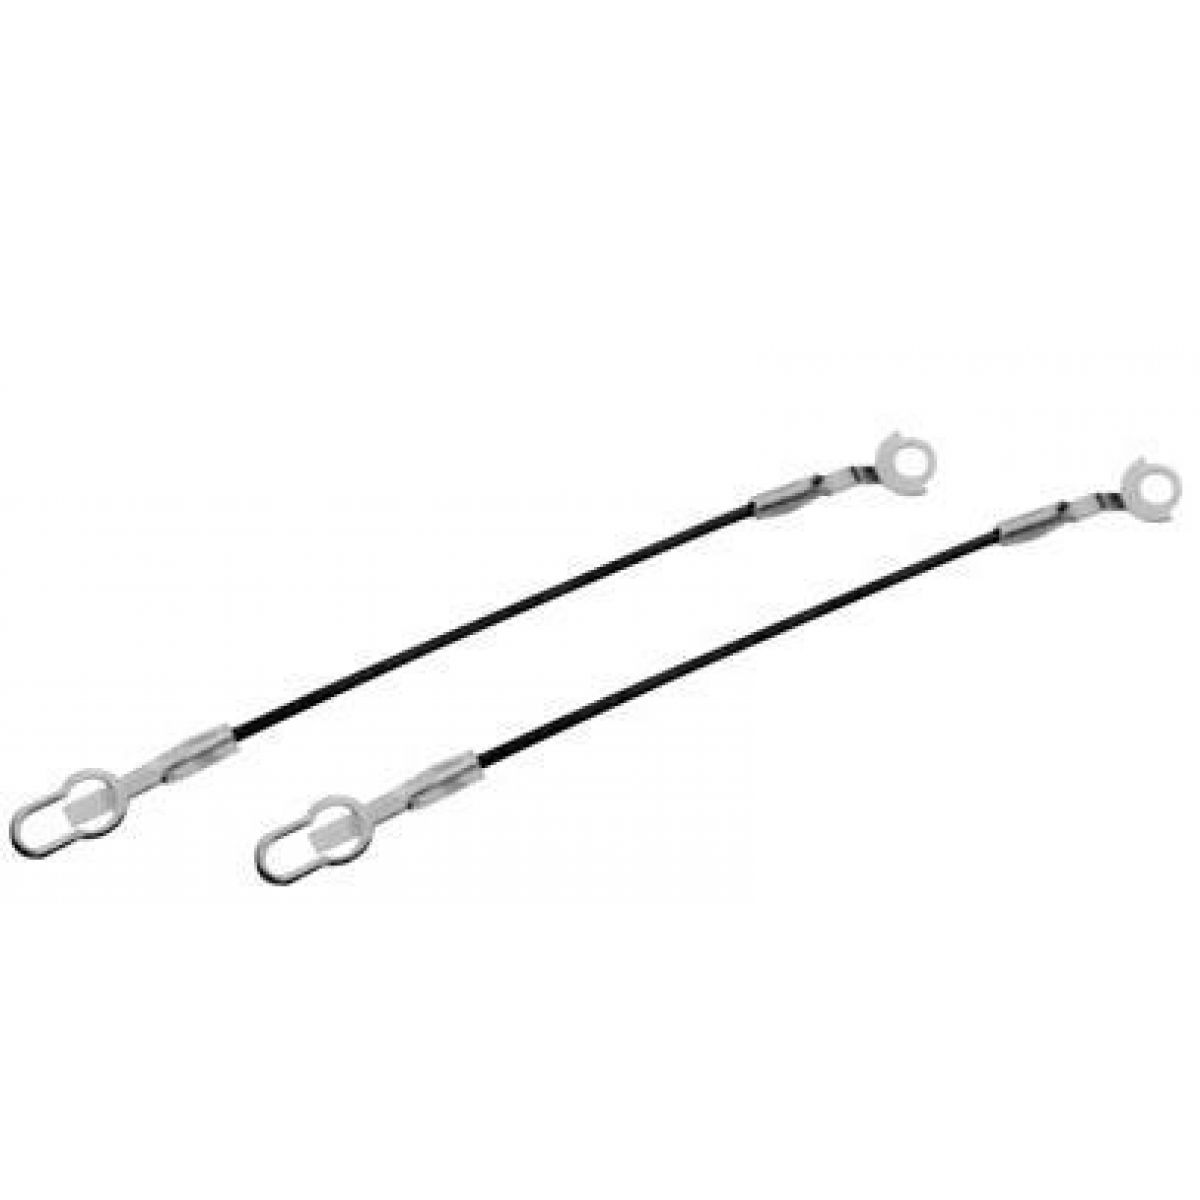 Ford ranger tailgate cable #9